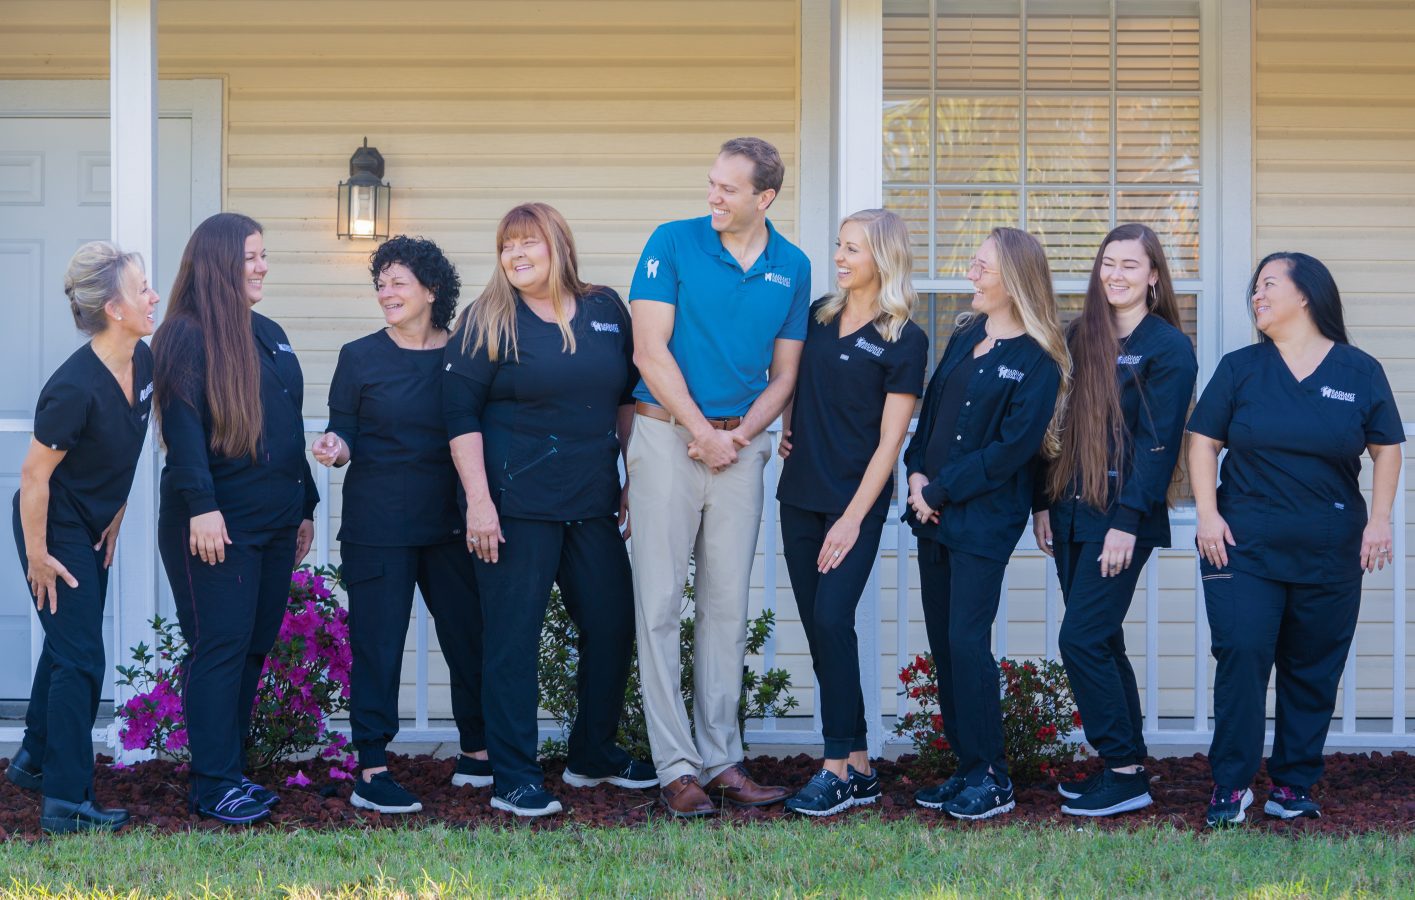 Meet Our Team at Radiant Dentistry